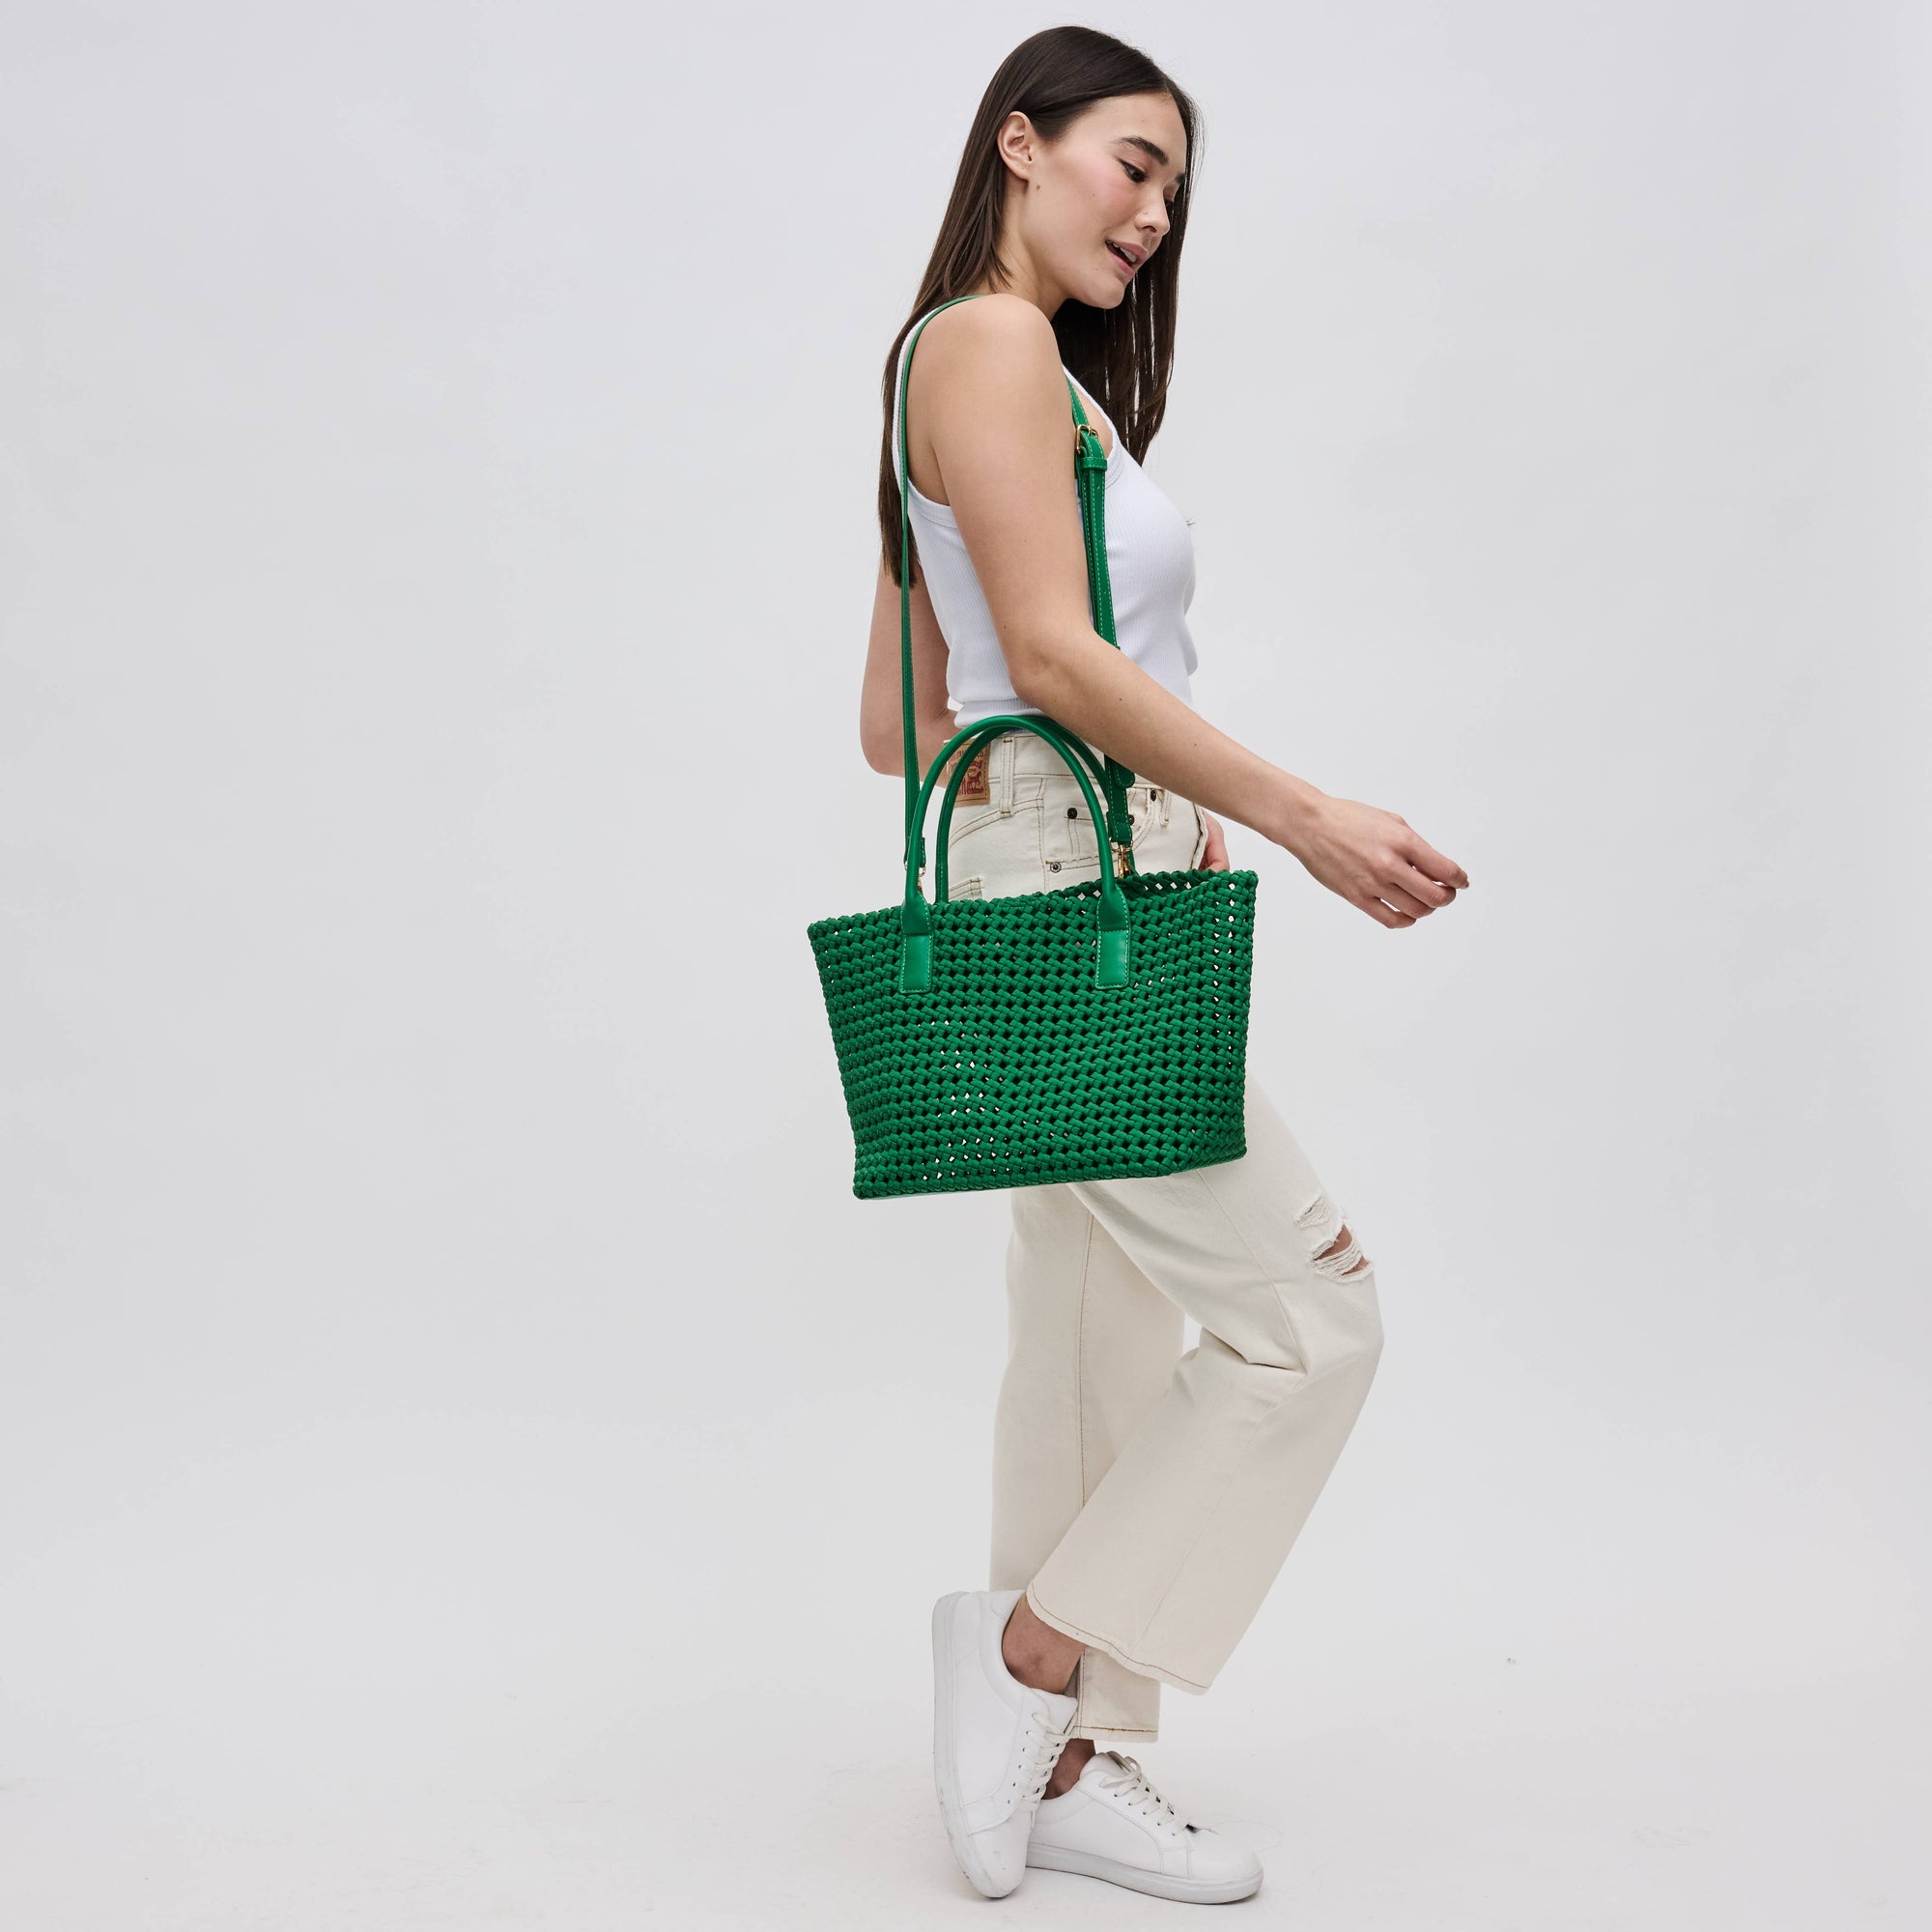 Solstice - Medium  Hand Woven Knot Tote: Kelly Green